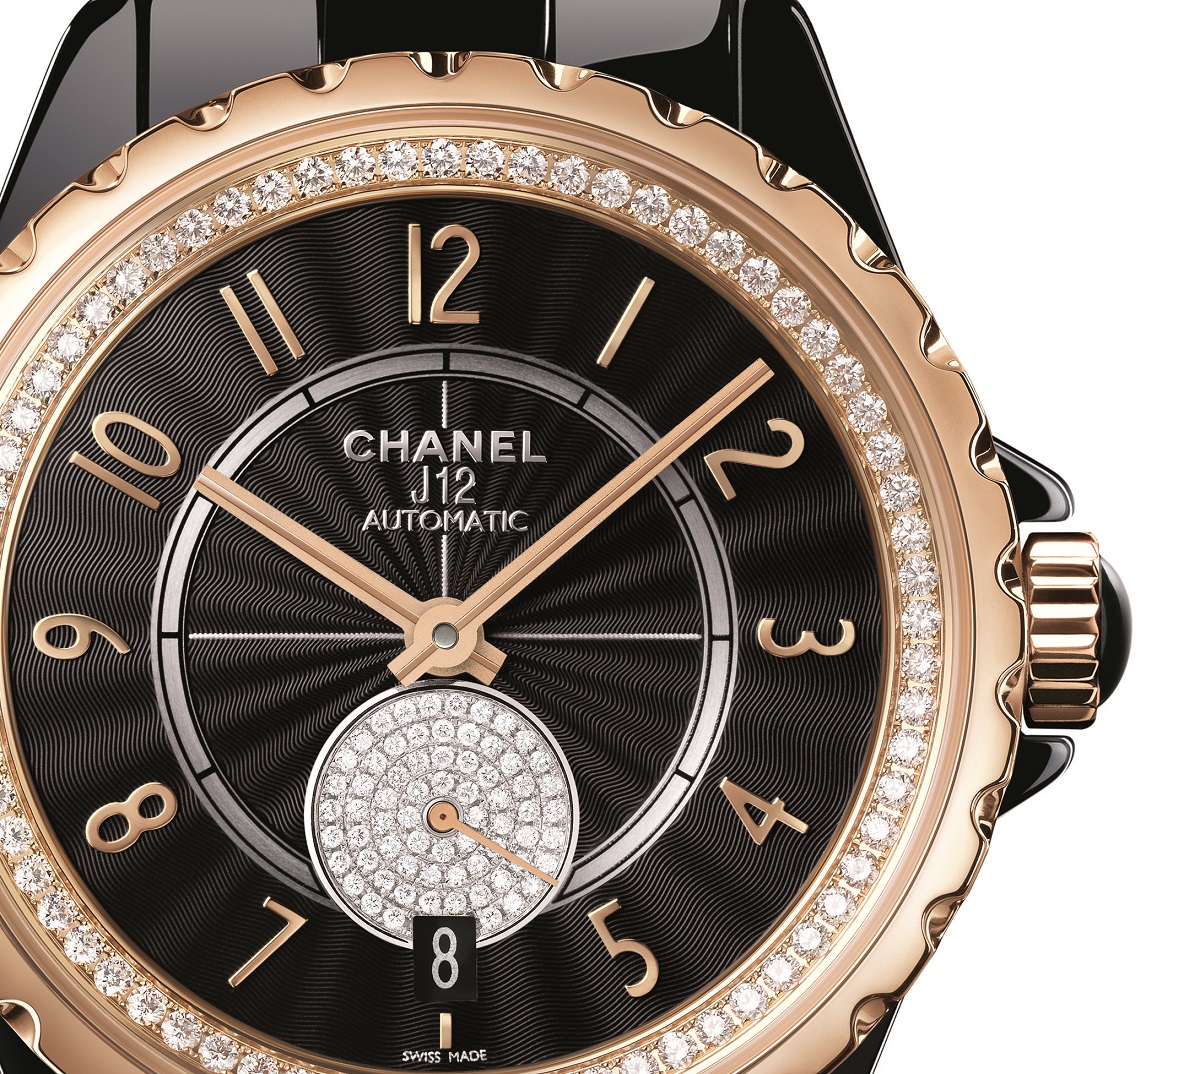 Gold standard: the Chanel J12 gets the gilded touch